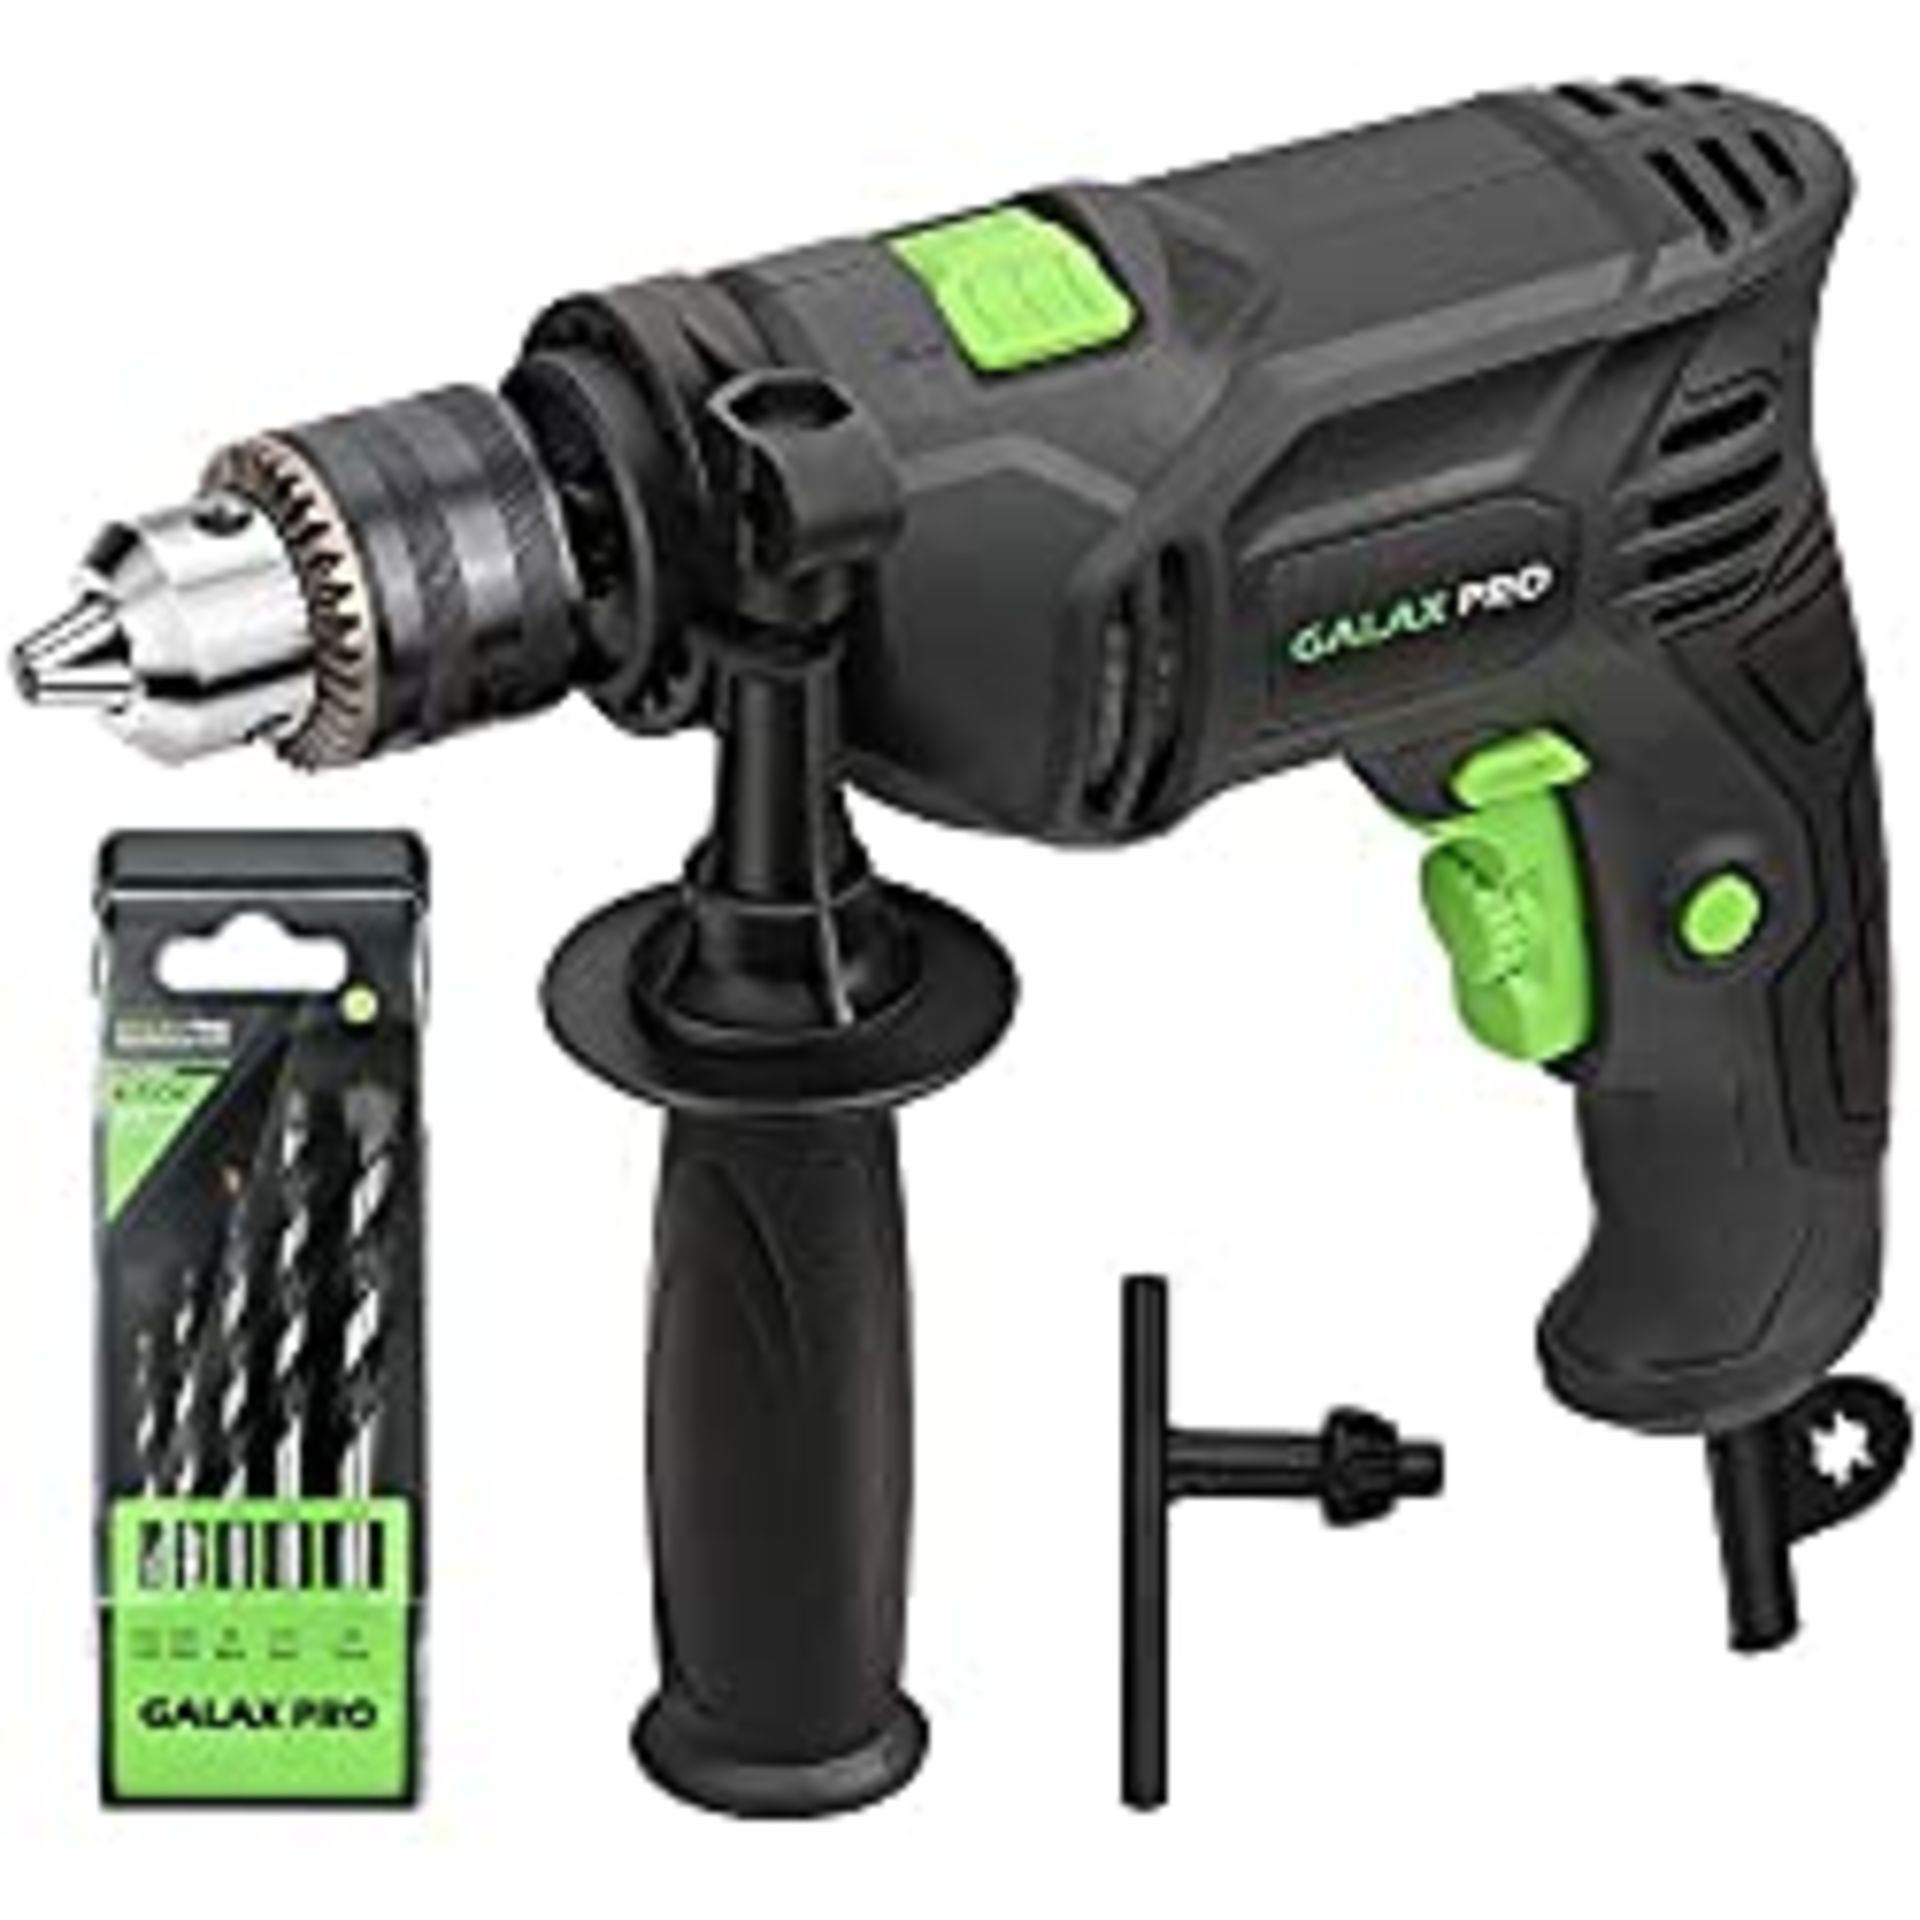 RRP £33.93 GALAX PRO Hammer Drill - Image 2 of 3